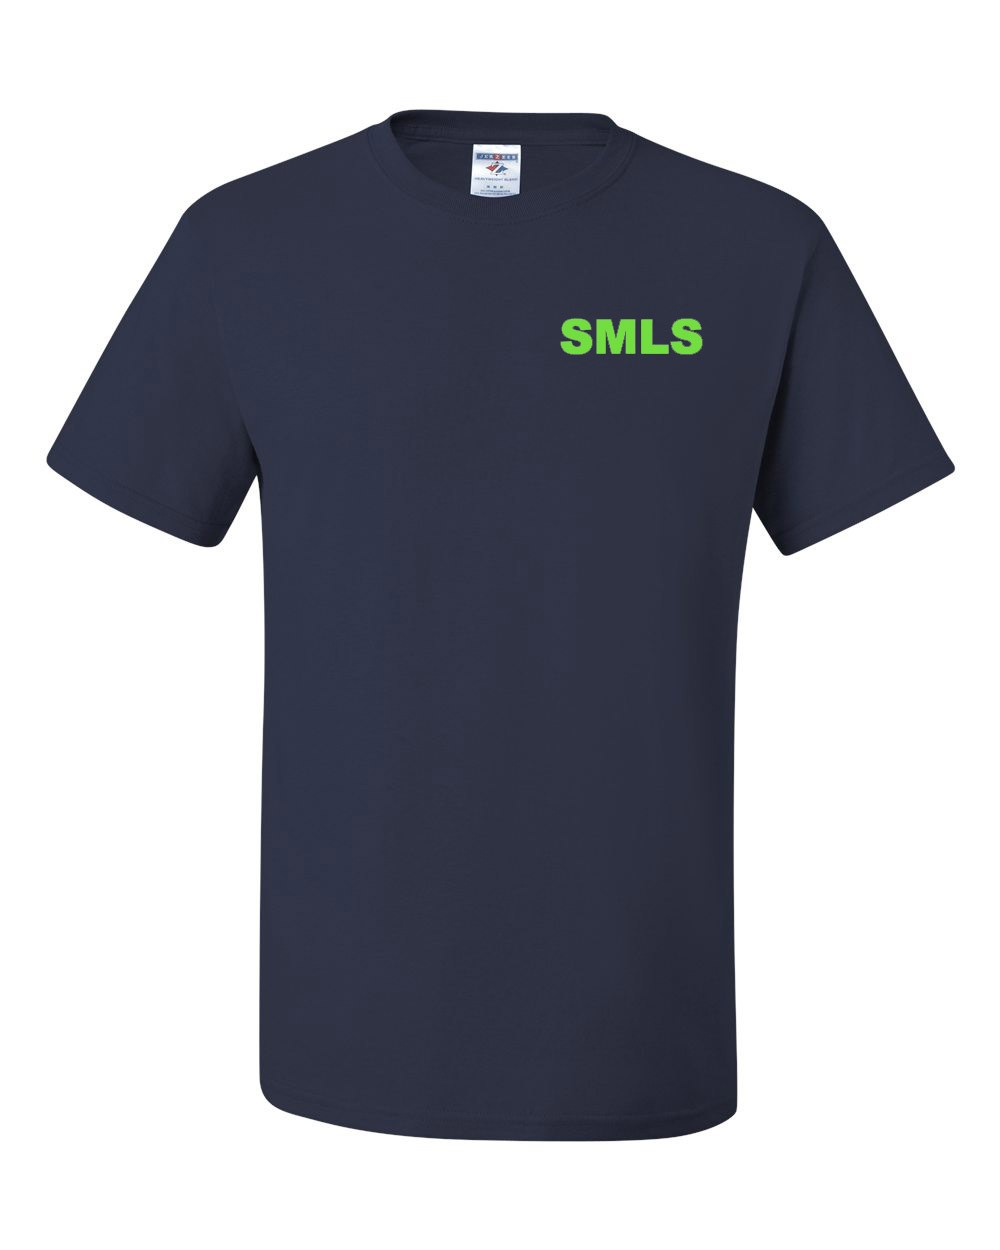 SMLS Spirit S/S T-Shirt w/ SMLS Neon Green Spirit Logo - Please Allow 2-3 Weeks for Delivery